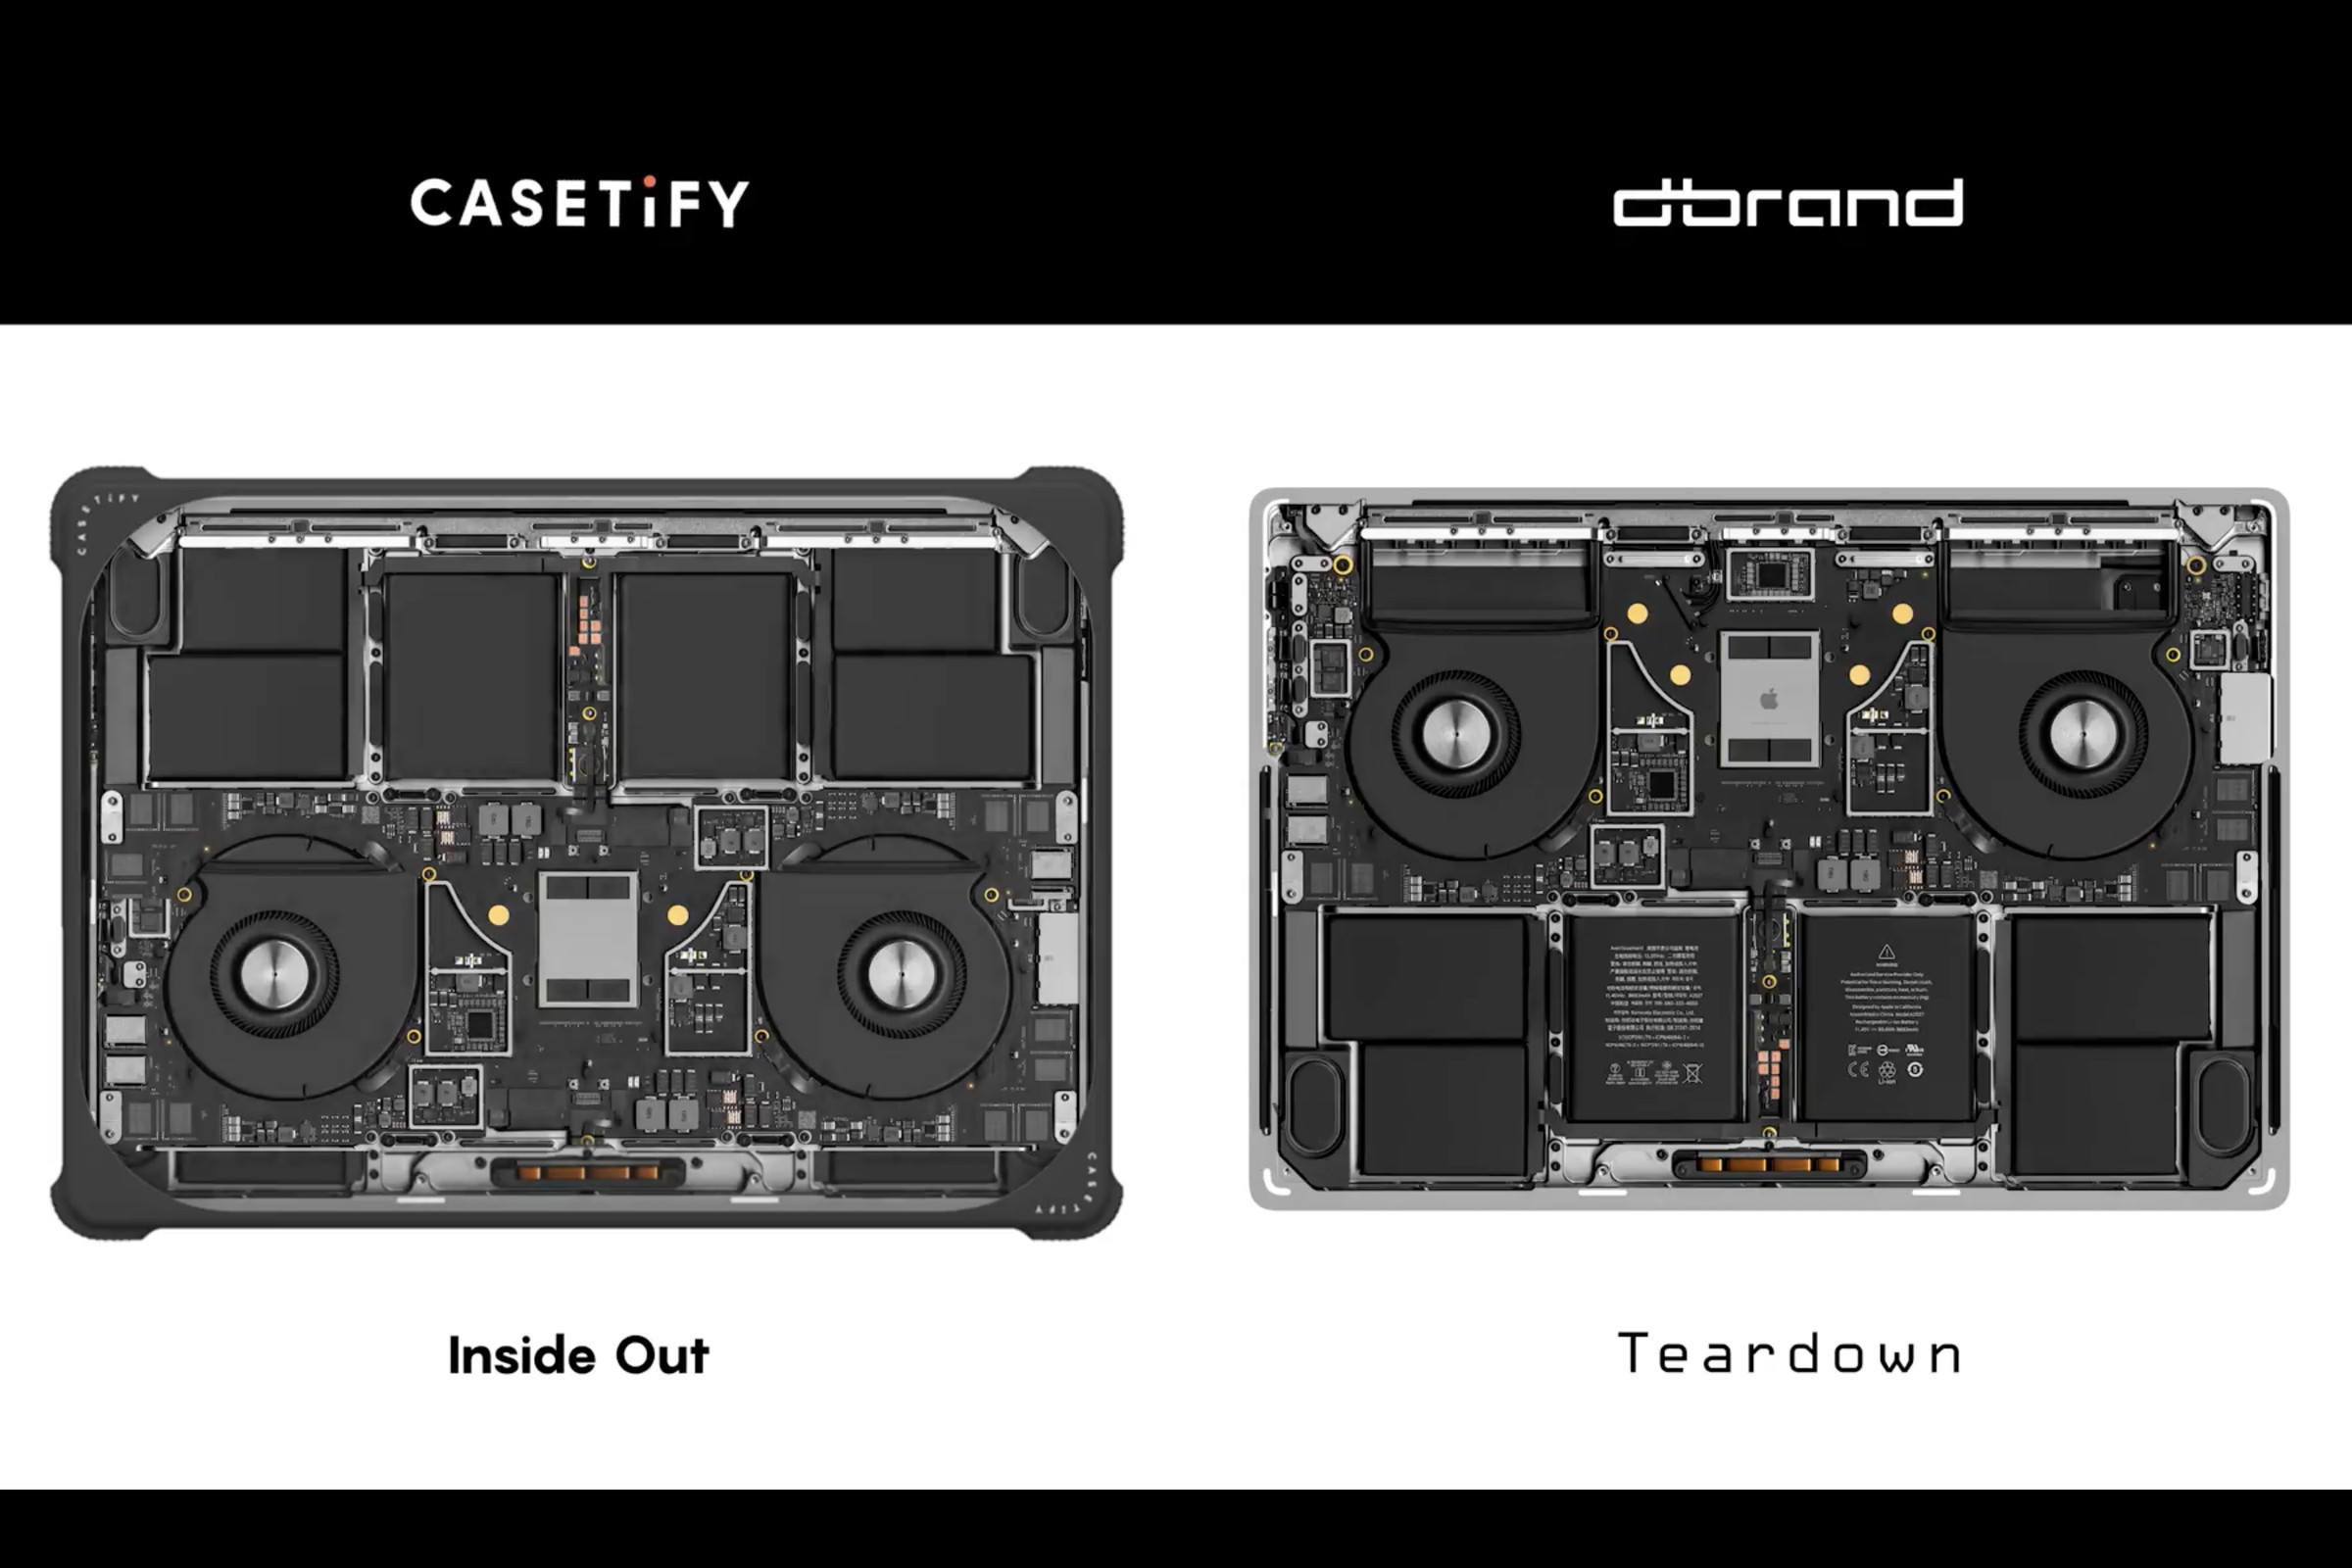 An image comparing Dbrand’s Teardown designs to Casetify’s Inside Out products.